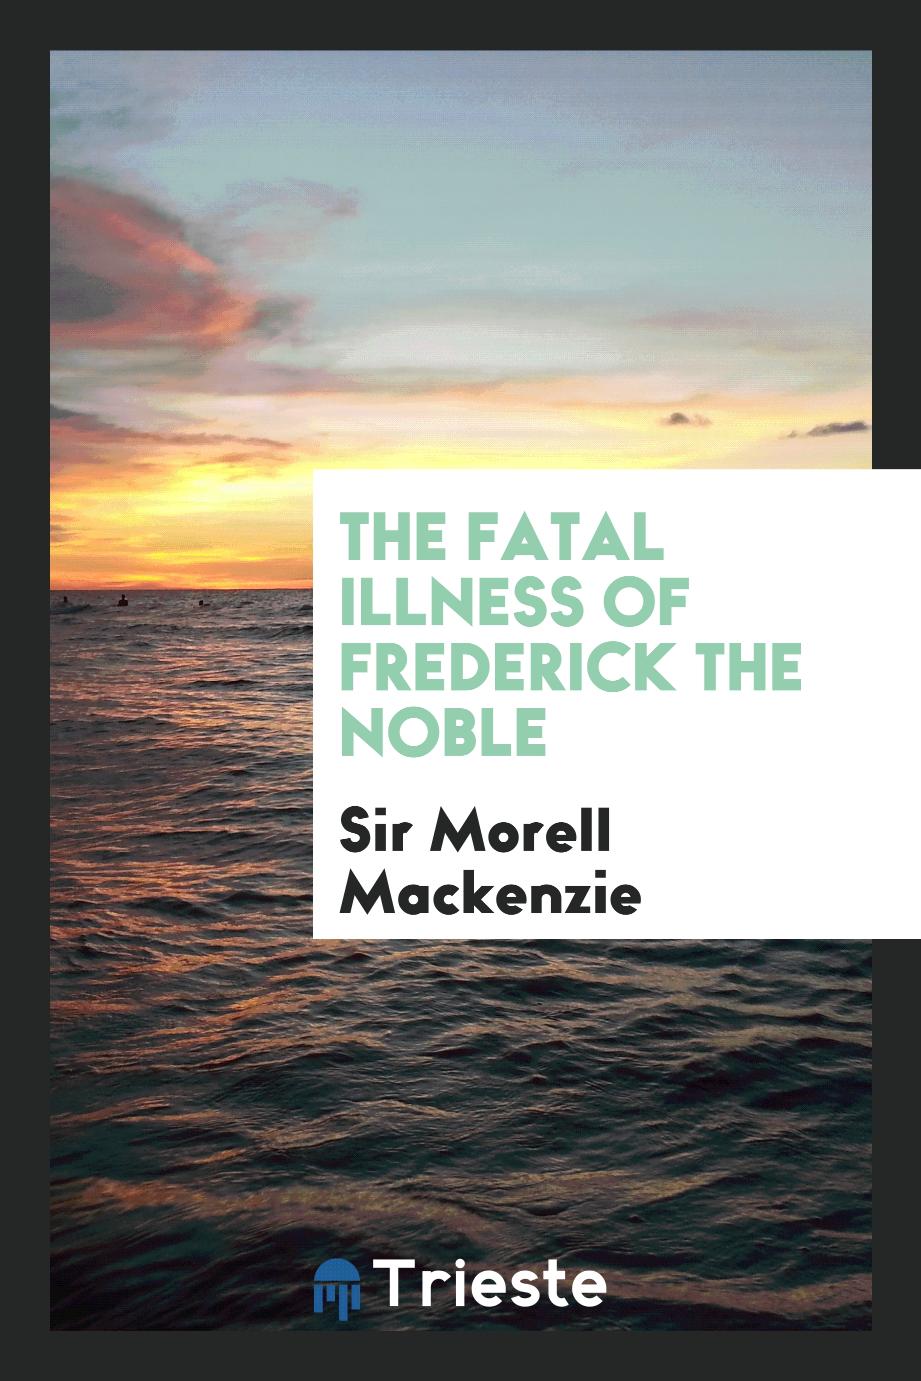 The Fatal illness of Frederick the Noble